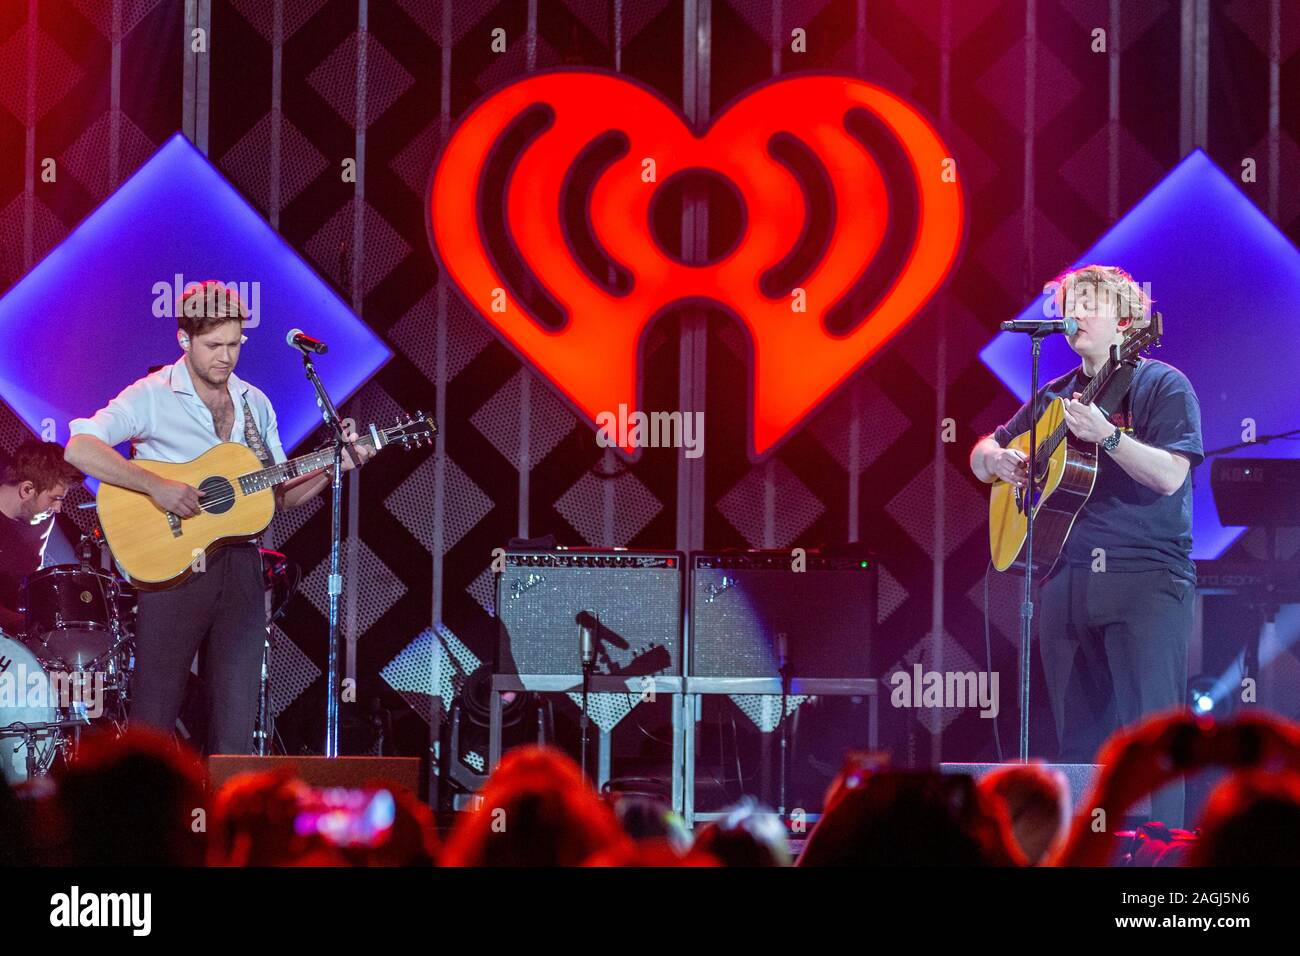 December 18, 2019, Chicago, IL, U.S: NIALL HORAN and LEWIS CAPALDI perform onstage during KISS FM 103.5's Jingle Ball 2019 at Allstate Arena in Rosemont, Illinois (Credit Image: © Daniel DeSlover/ZUMA Wire) Stock Photo